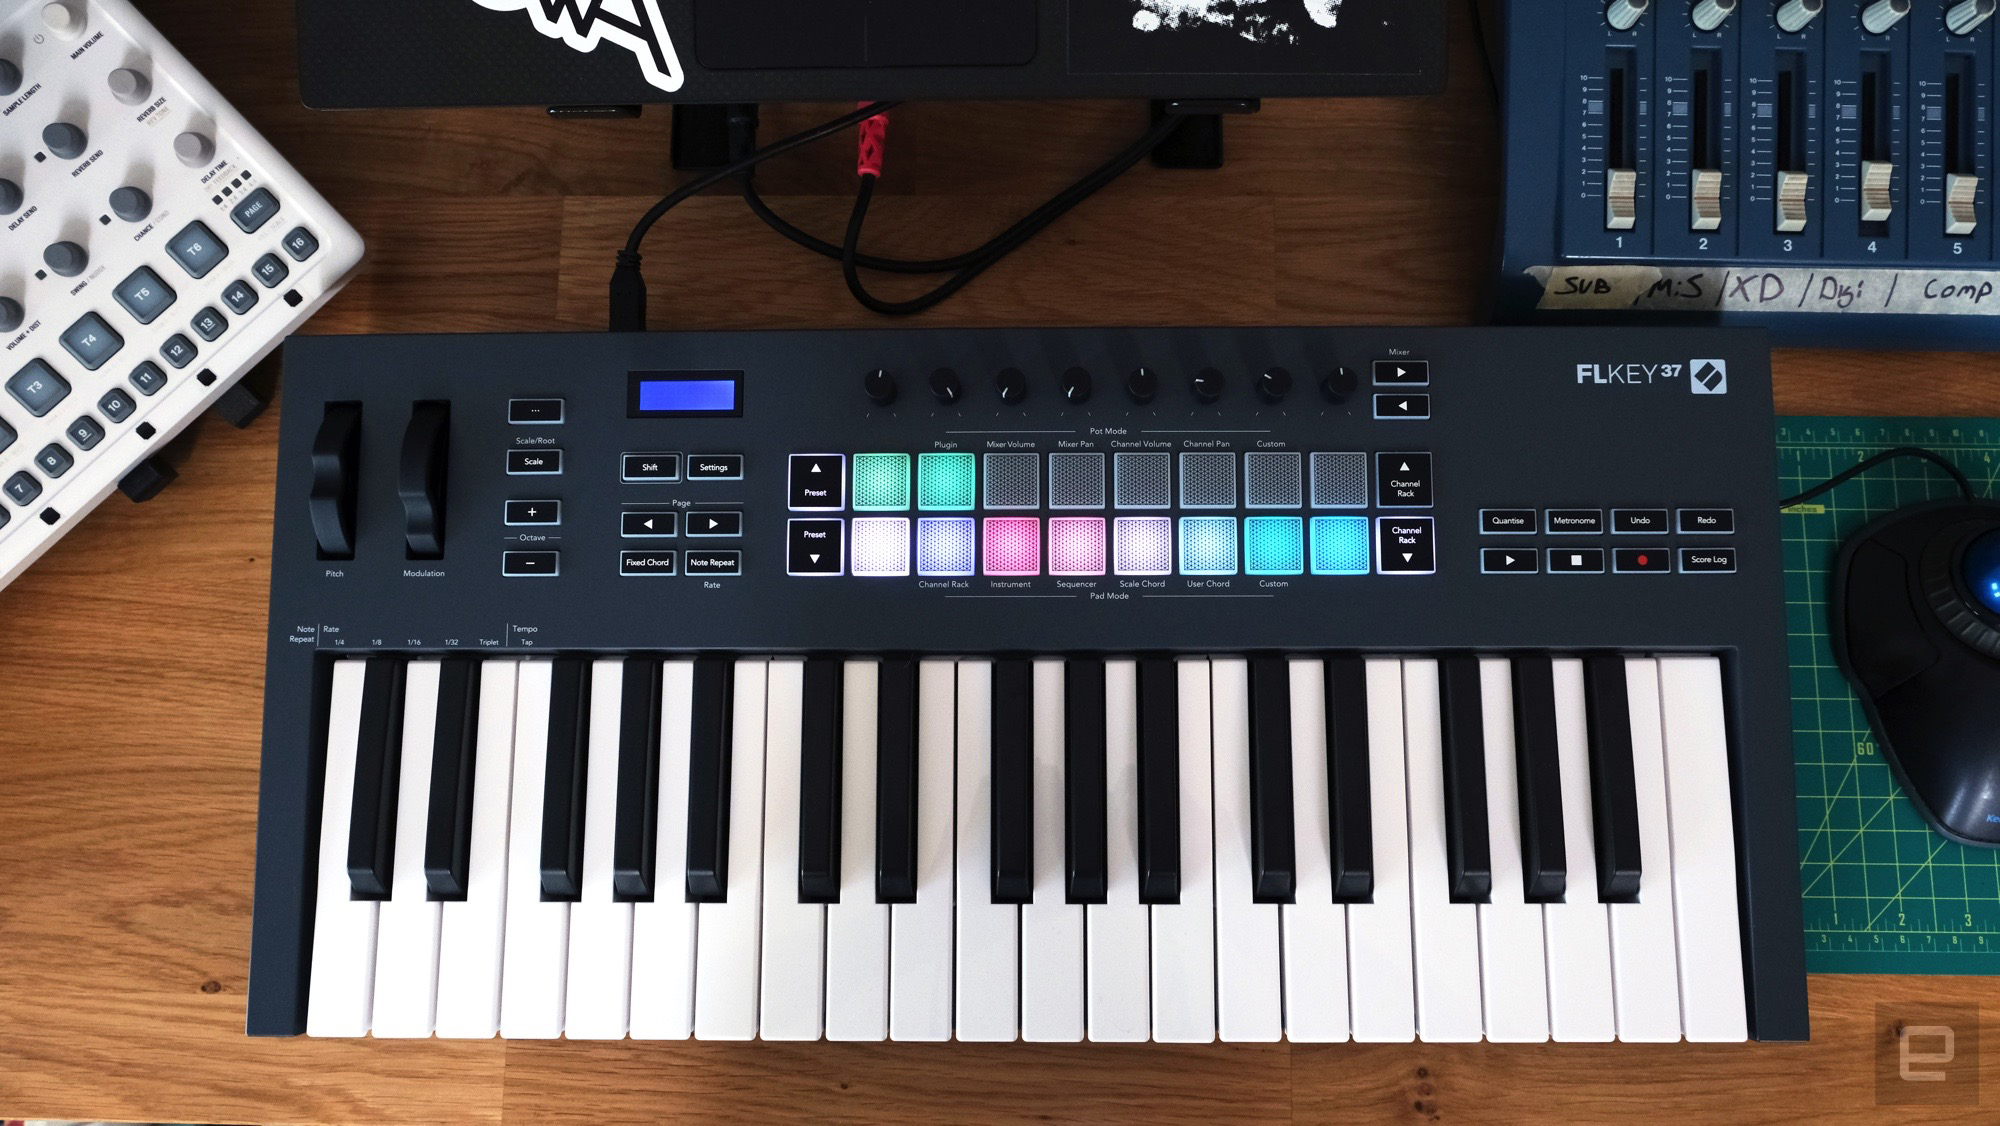 Novation's first keyboard for FL Studio offers a lot of utility for $200